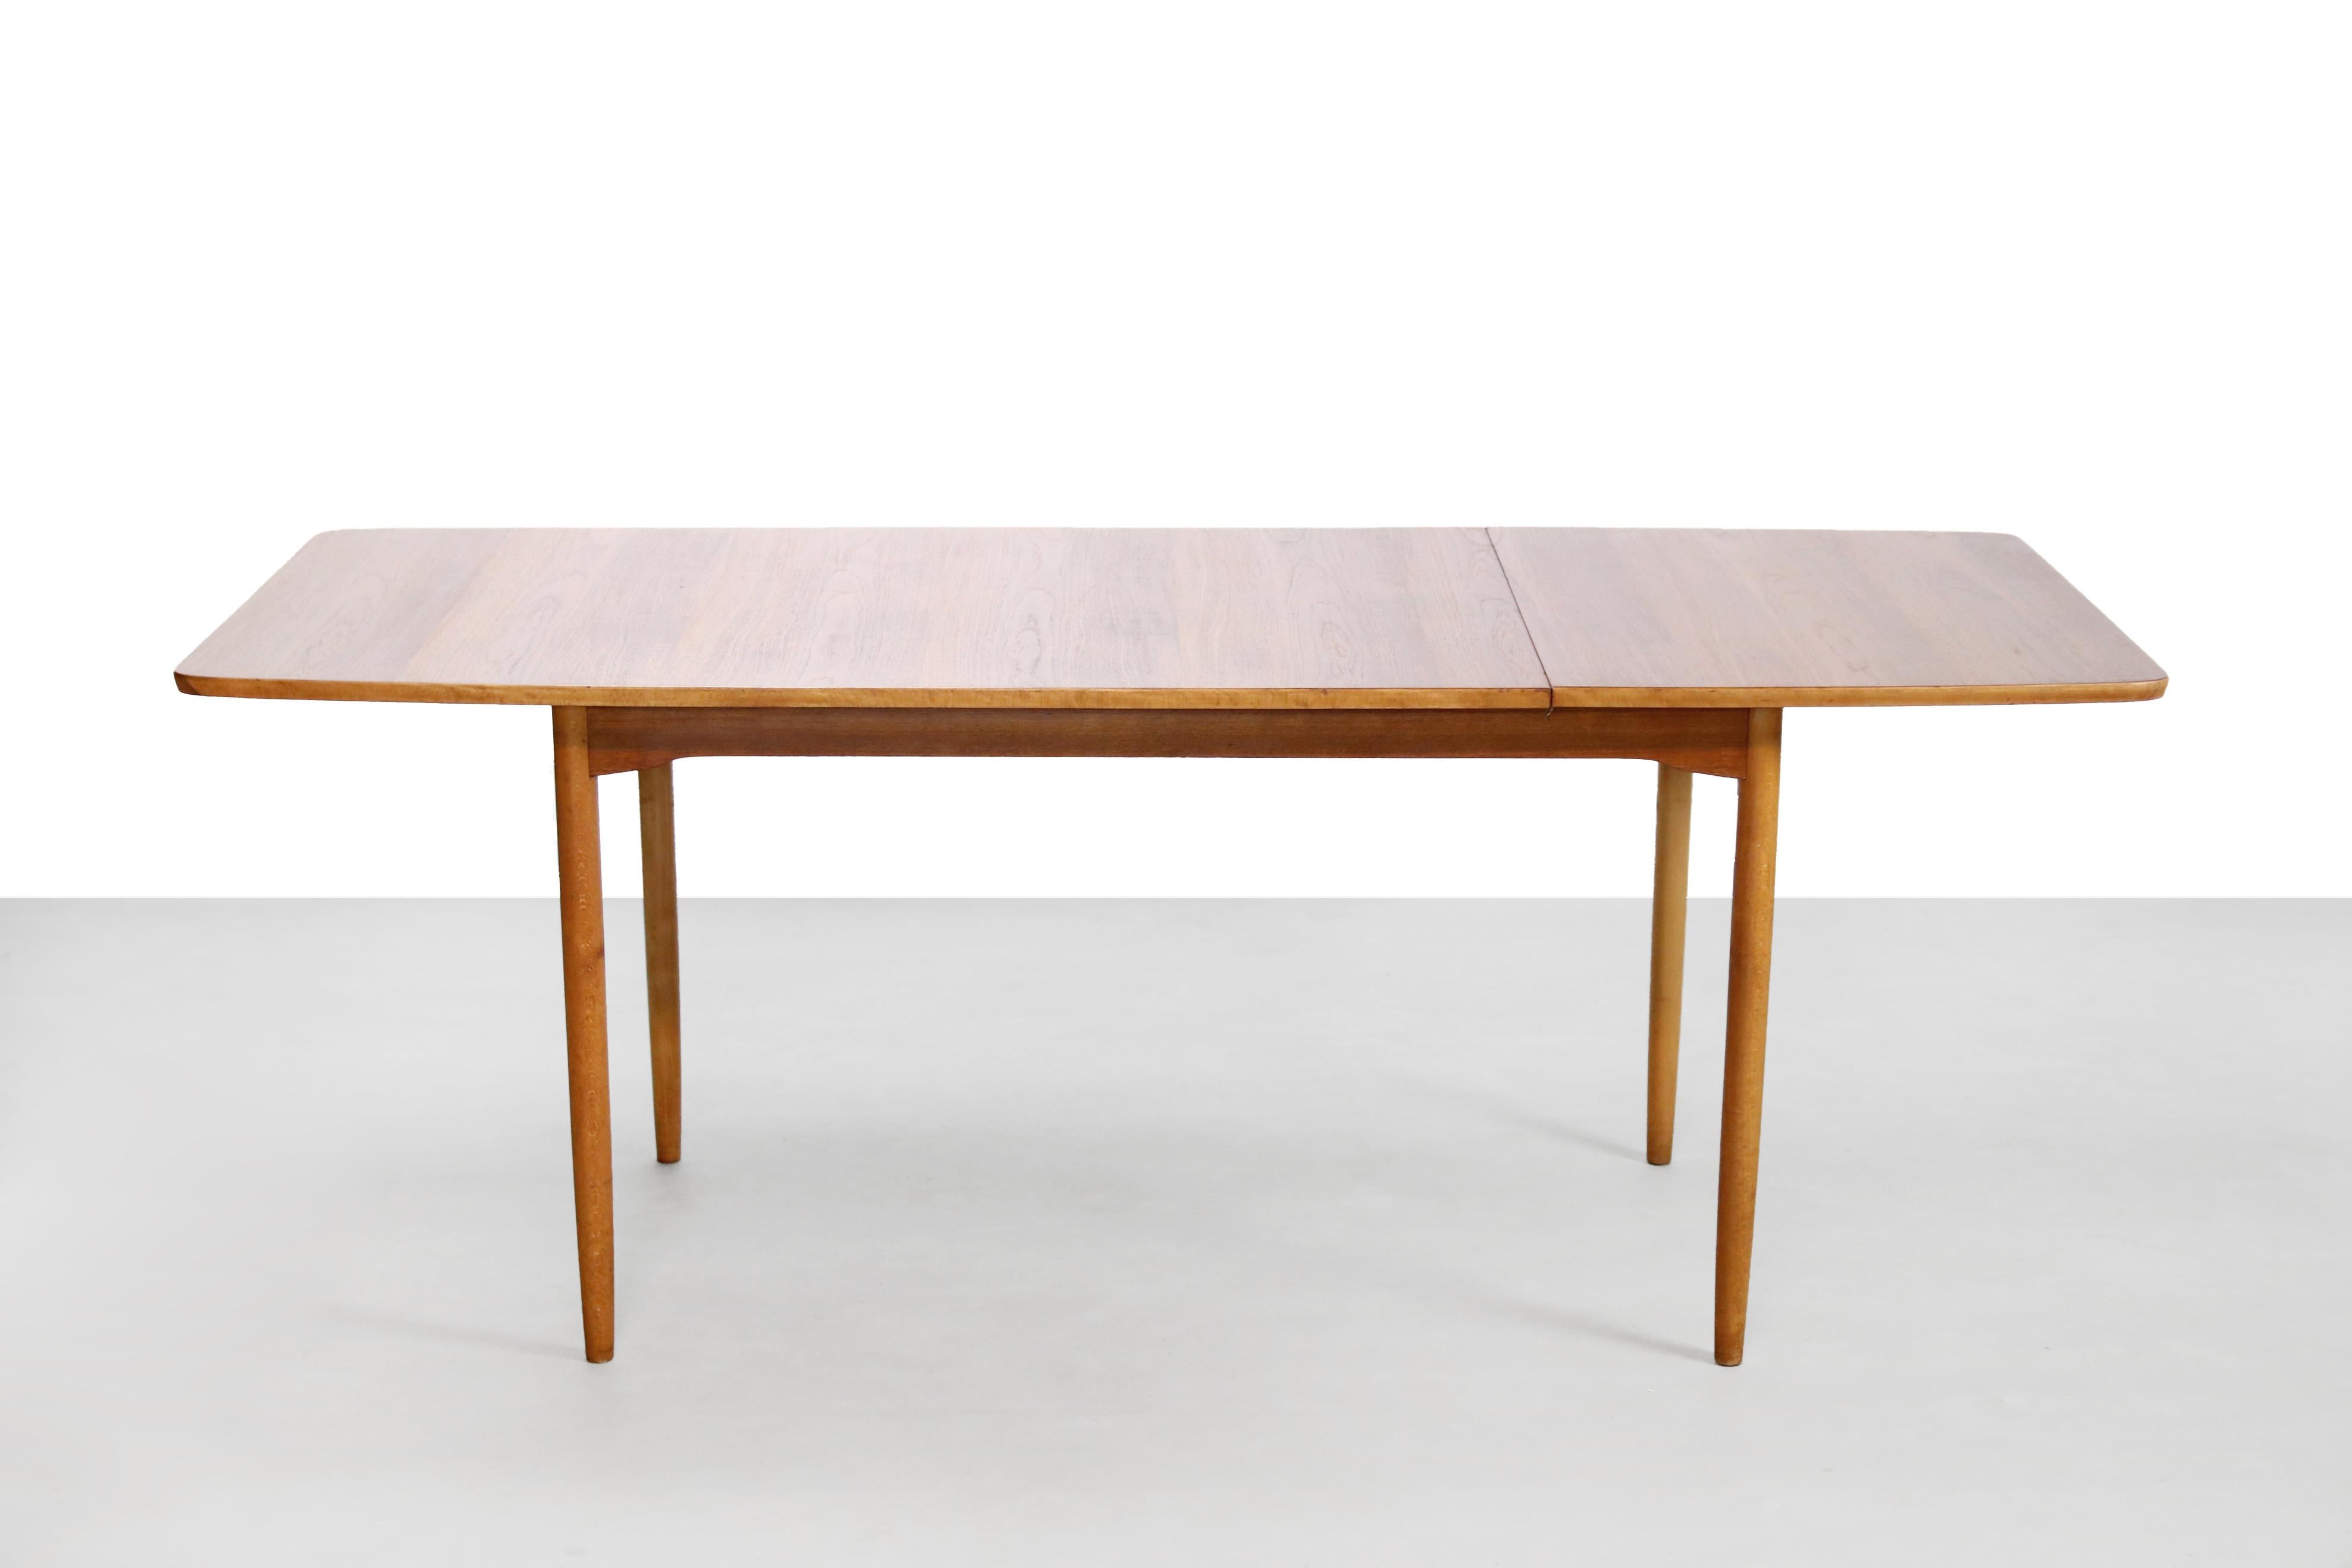 Beautiful teak wooden table with beech legs which can be extended by a drop leaf table top. By folding the top up and sliding it all the way to the left, the table is easily extended. This table is marked the same as the Hans Wegner CH-30 chairs and